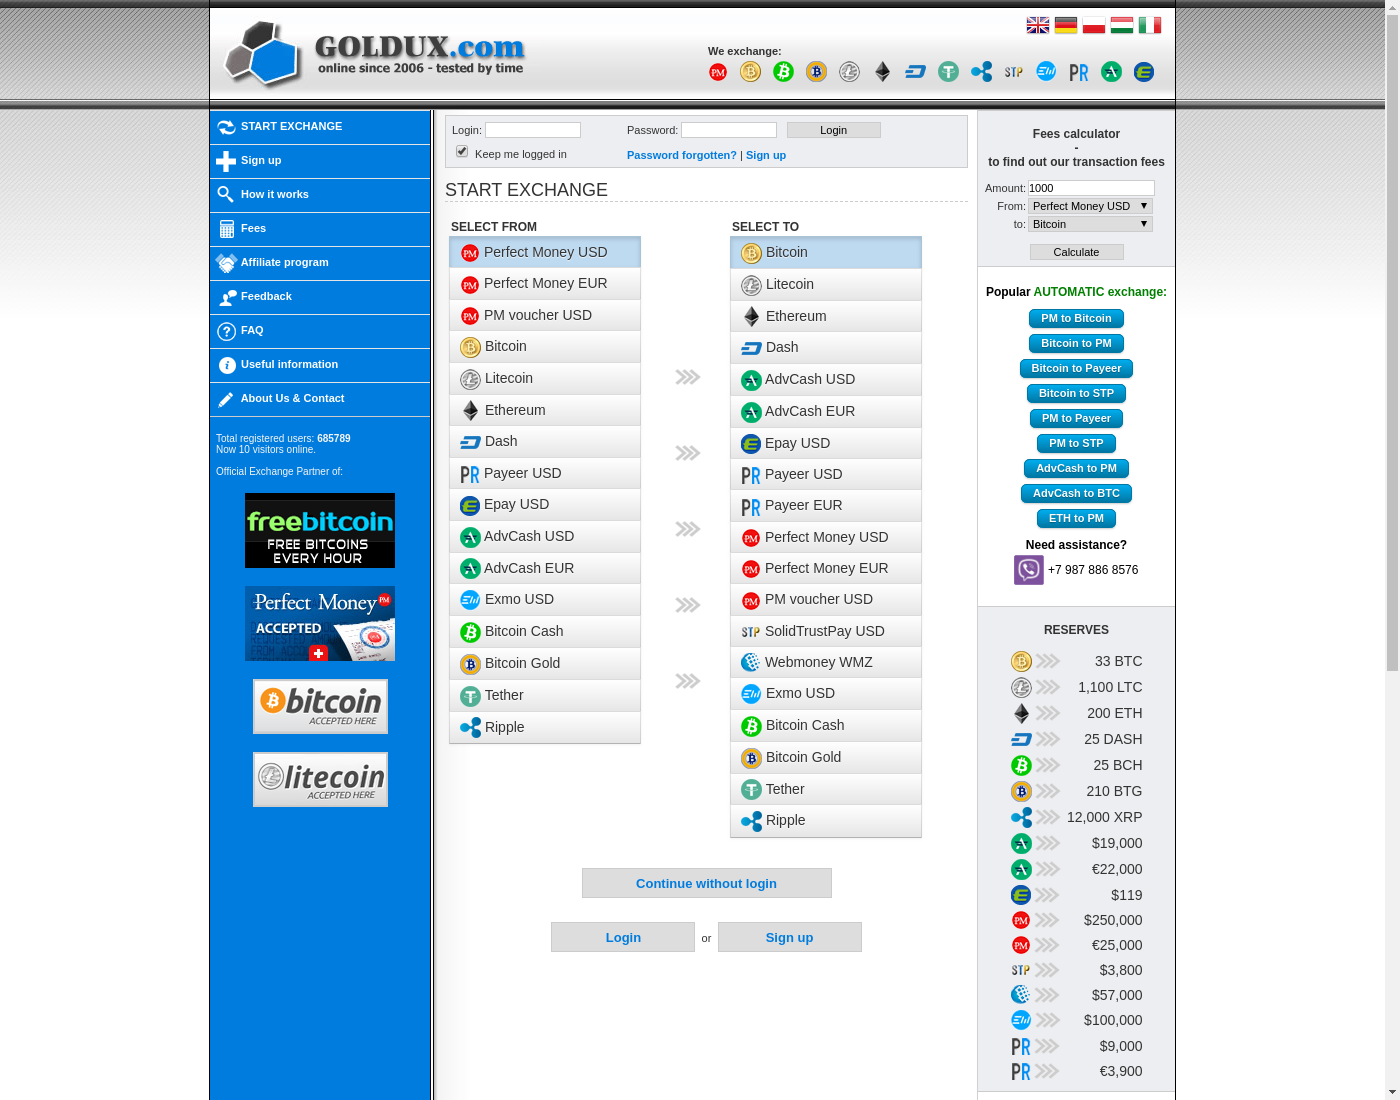 goldux user interface: the home page in English